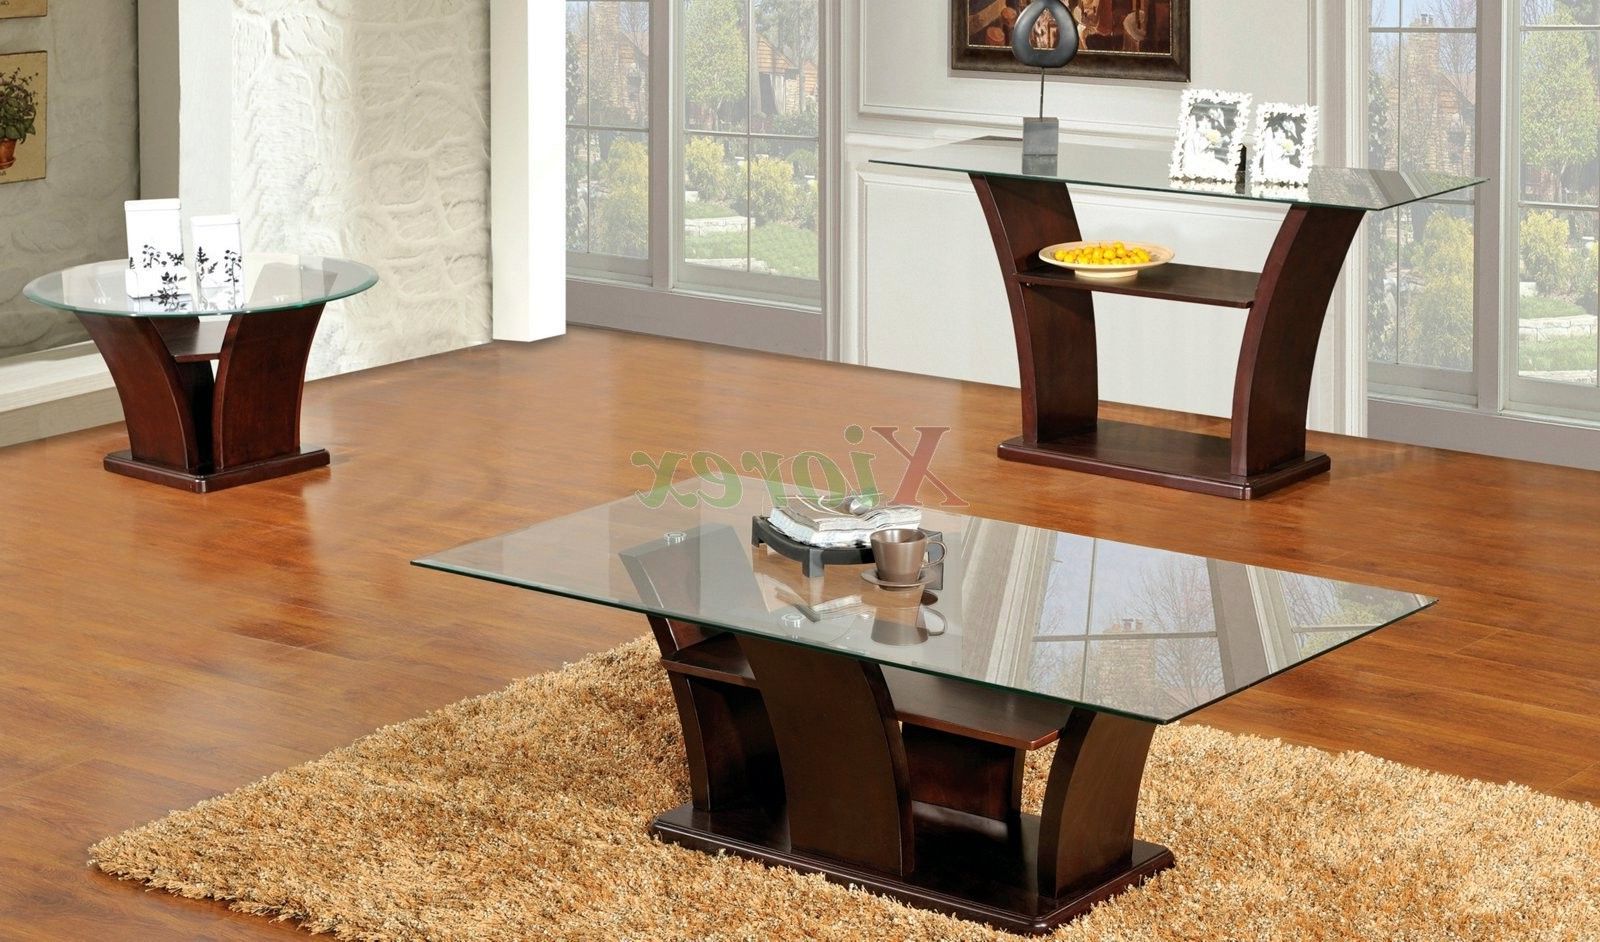 Sofa Table With Chairs Intended For Current Columba 3 Piece Coffee Table Set With Sofa Console Table (View 1 of 20)